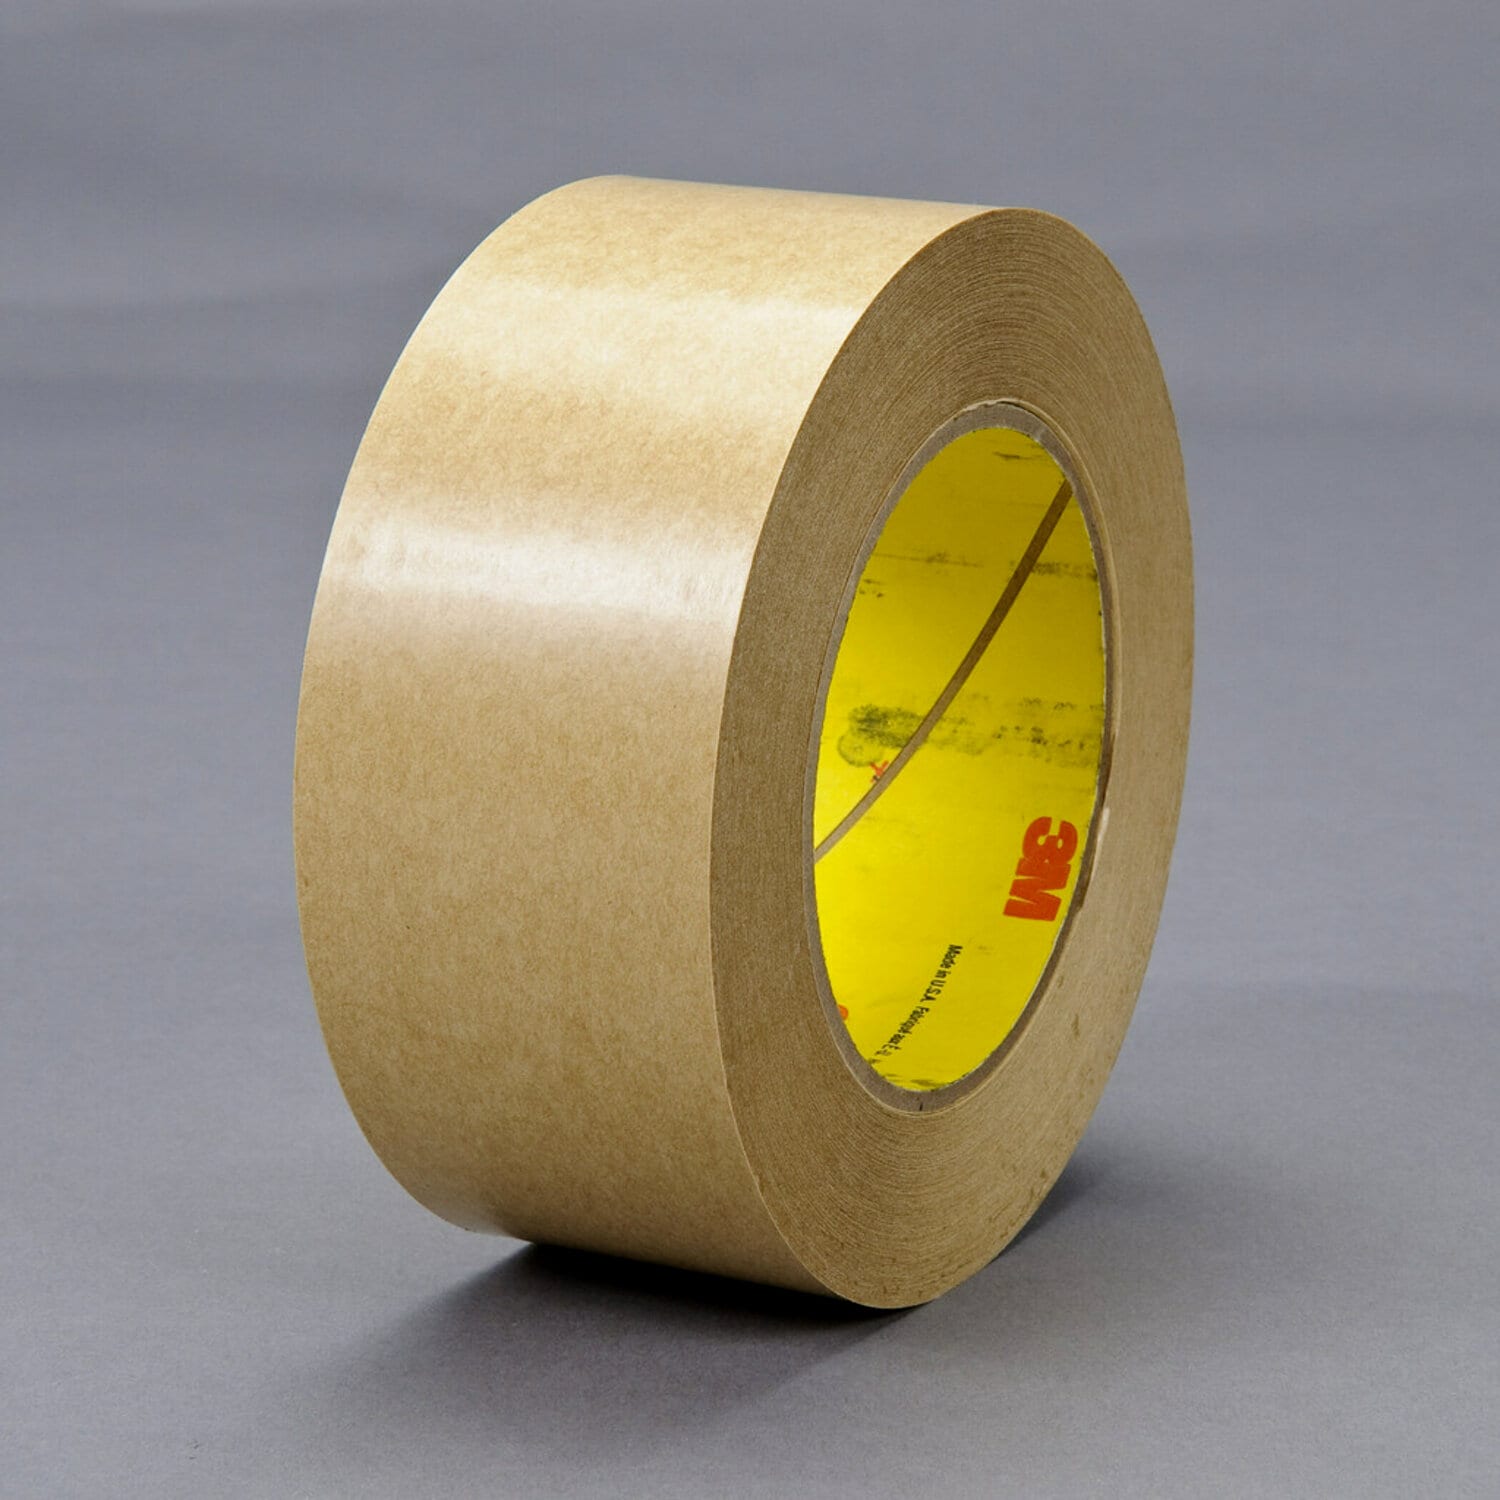 7000017184 - 3M Adhesive Transfer Tape 465, Clear, 48 in x 60 yd, 2 mil, 1 roll per
case